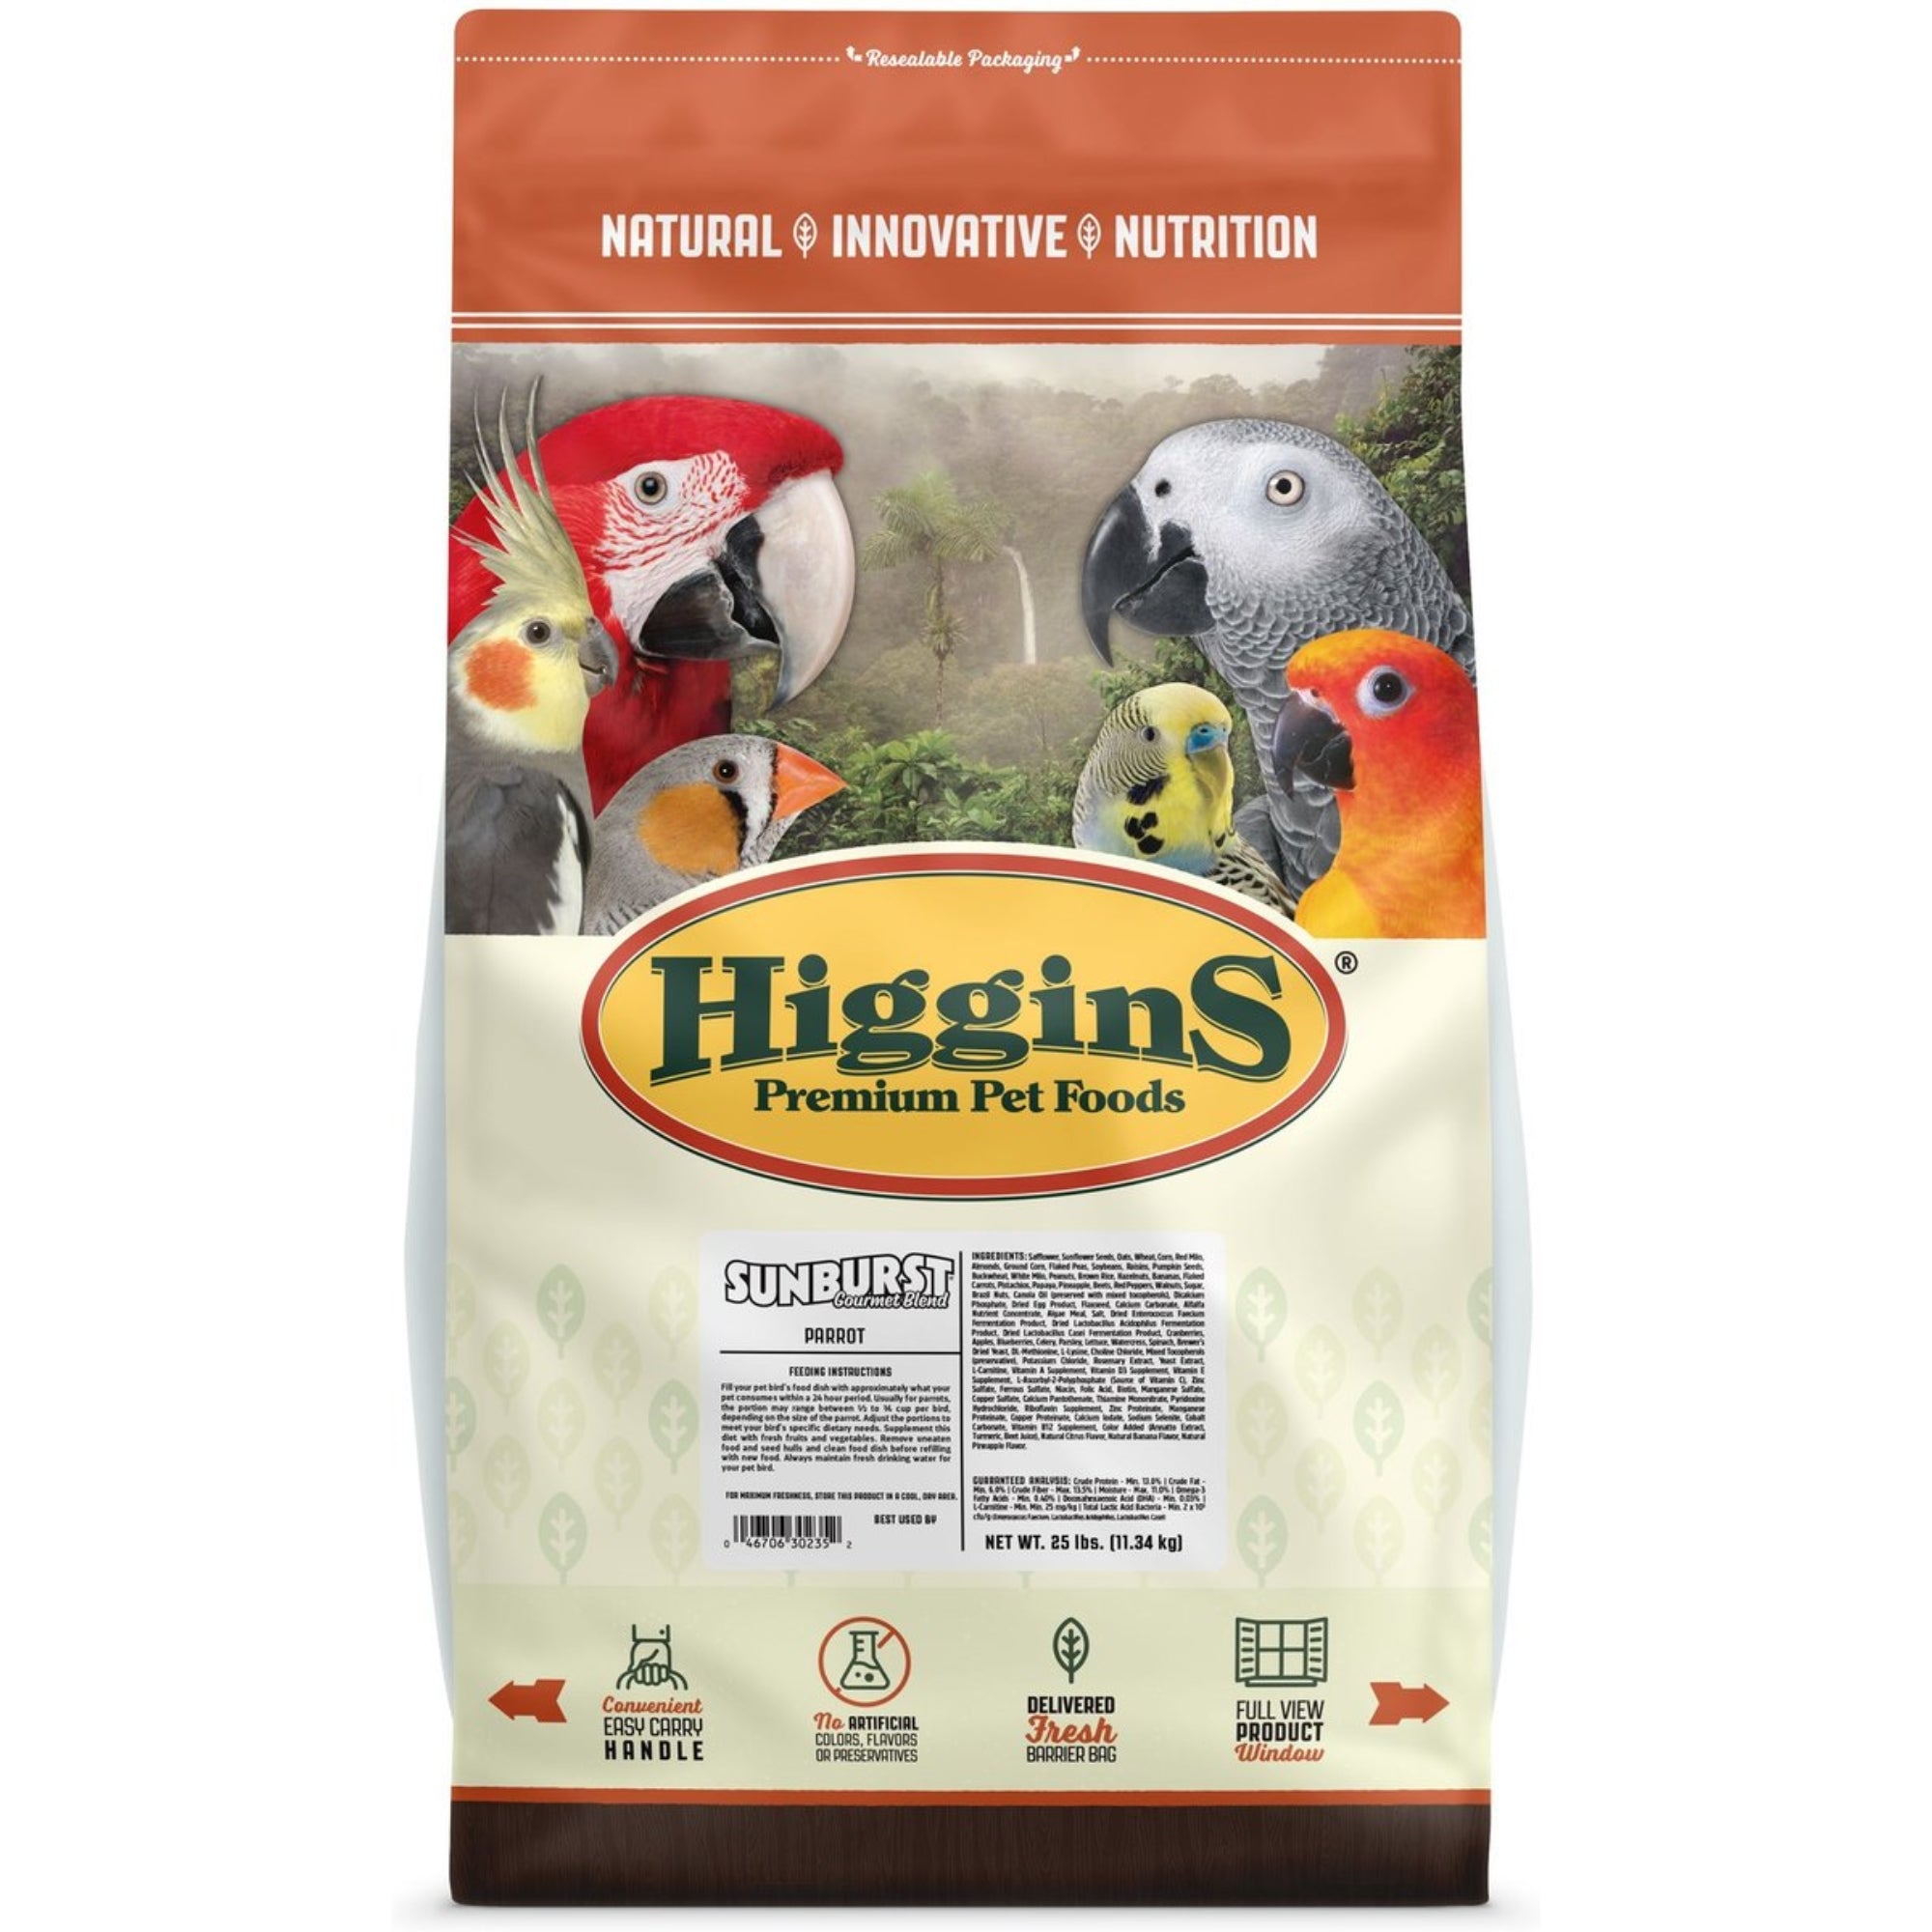 Higgins Sunburst Gourmet Bird Food Blend for Parrots, Food and Treat in One, 25lbs